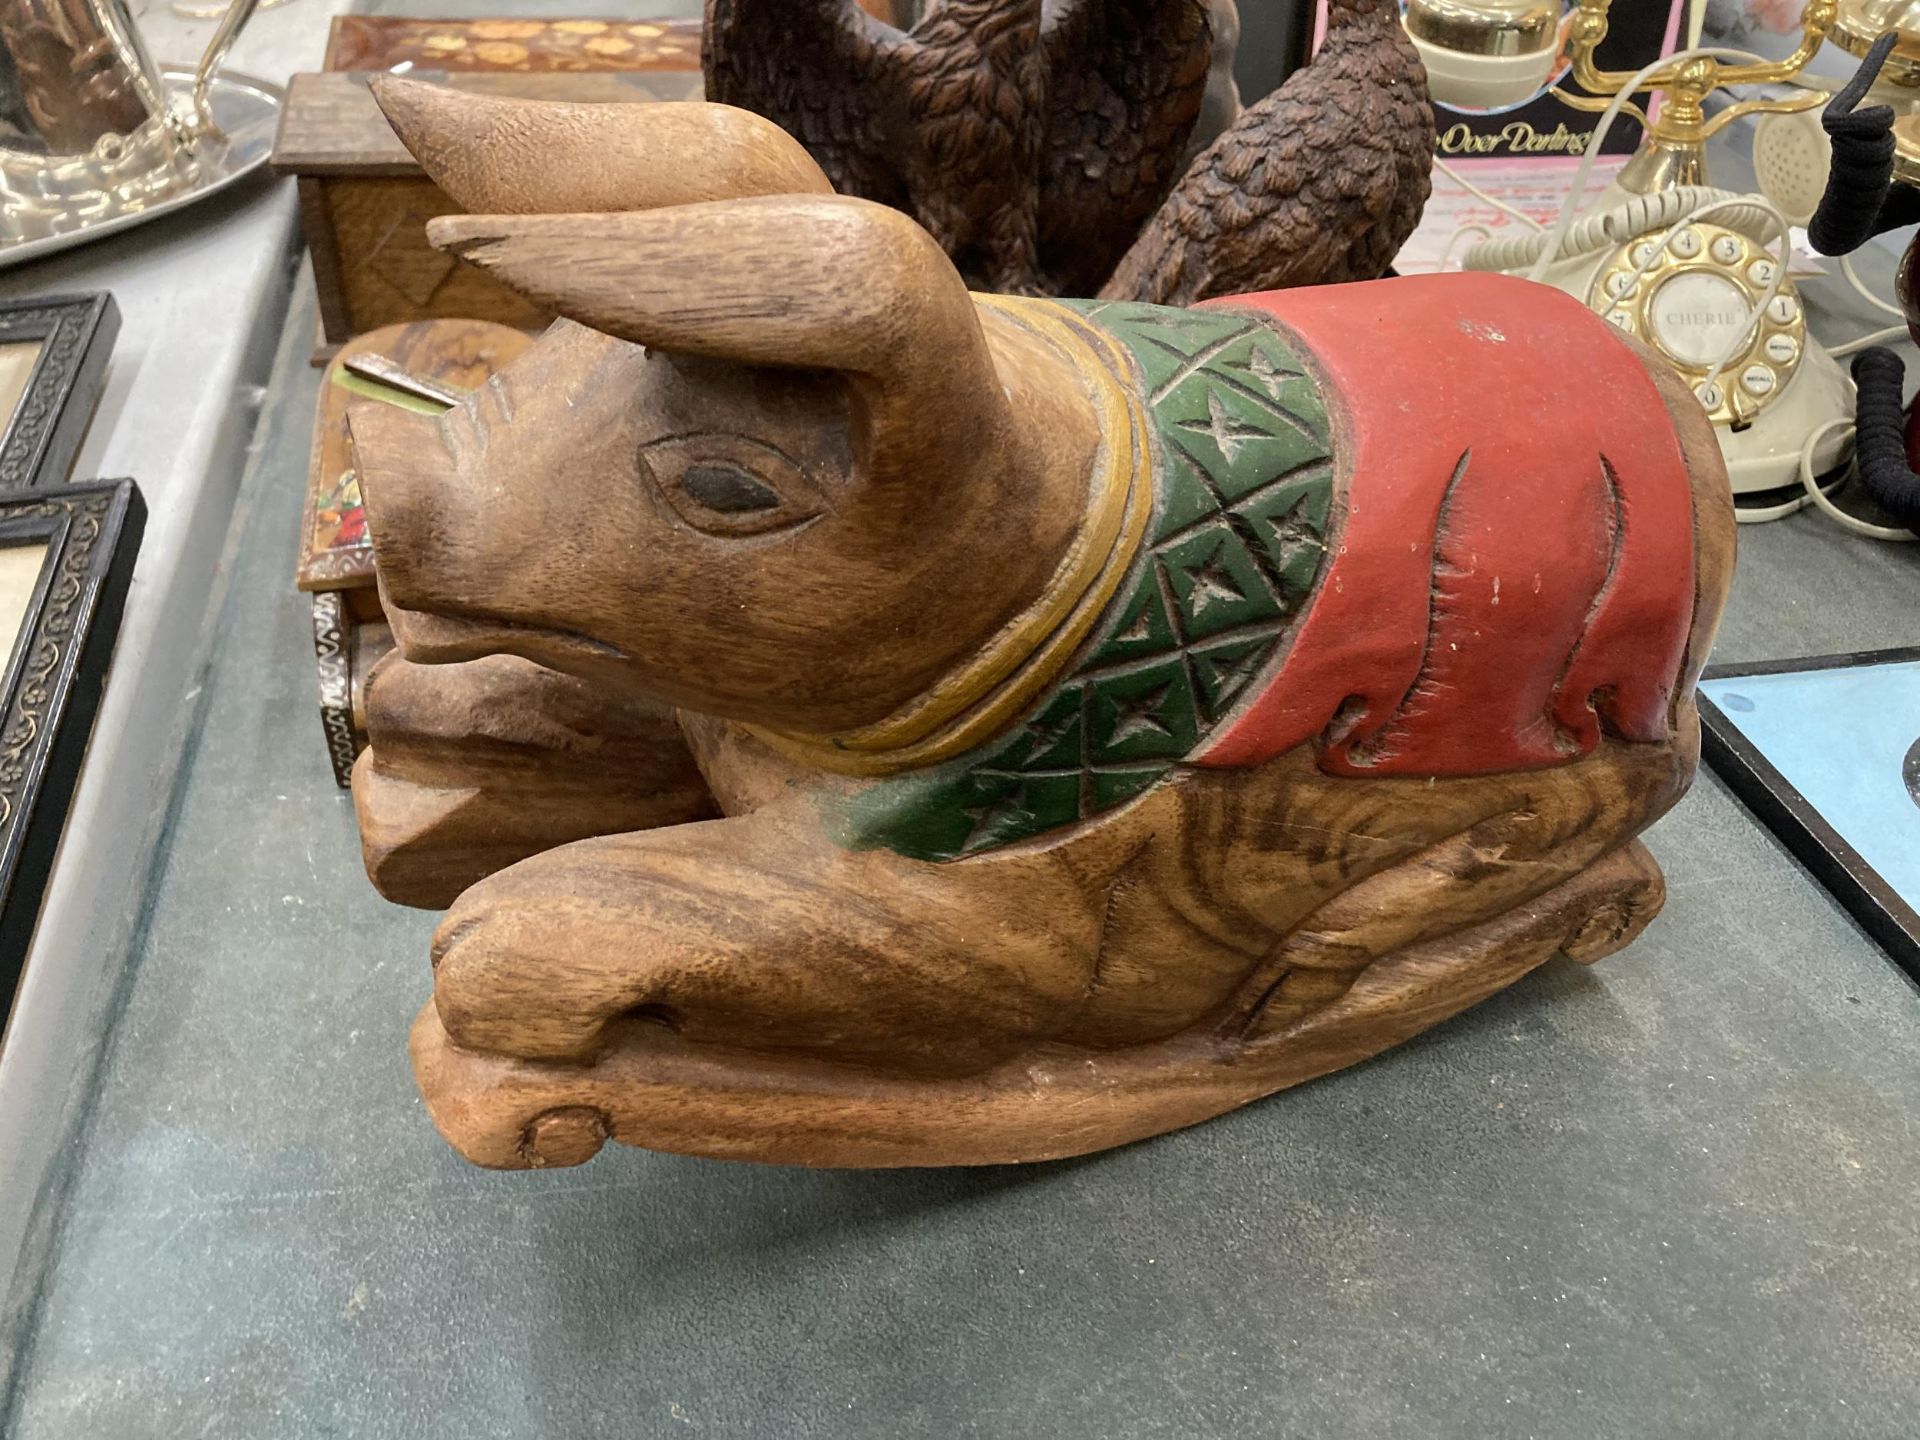 A COLLECTION OF WOODEN WARES,ROCKING PIG FIGURE, INLAID BOX, EAGLE FIGURE - Image 2 of 4